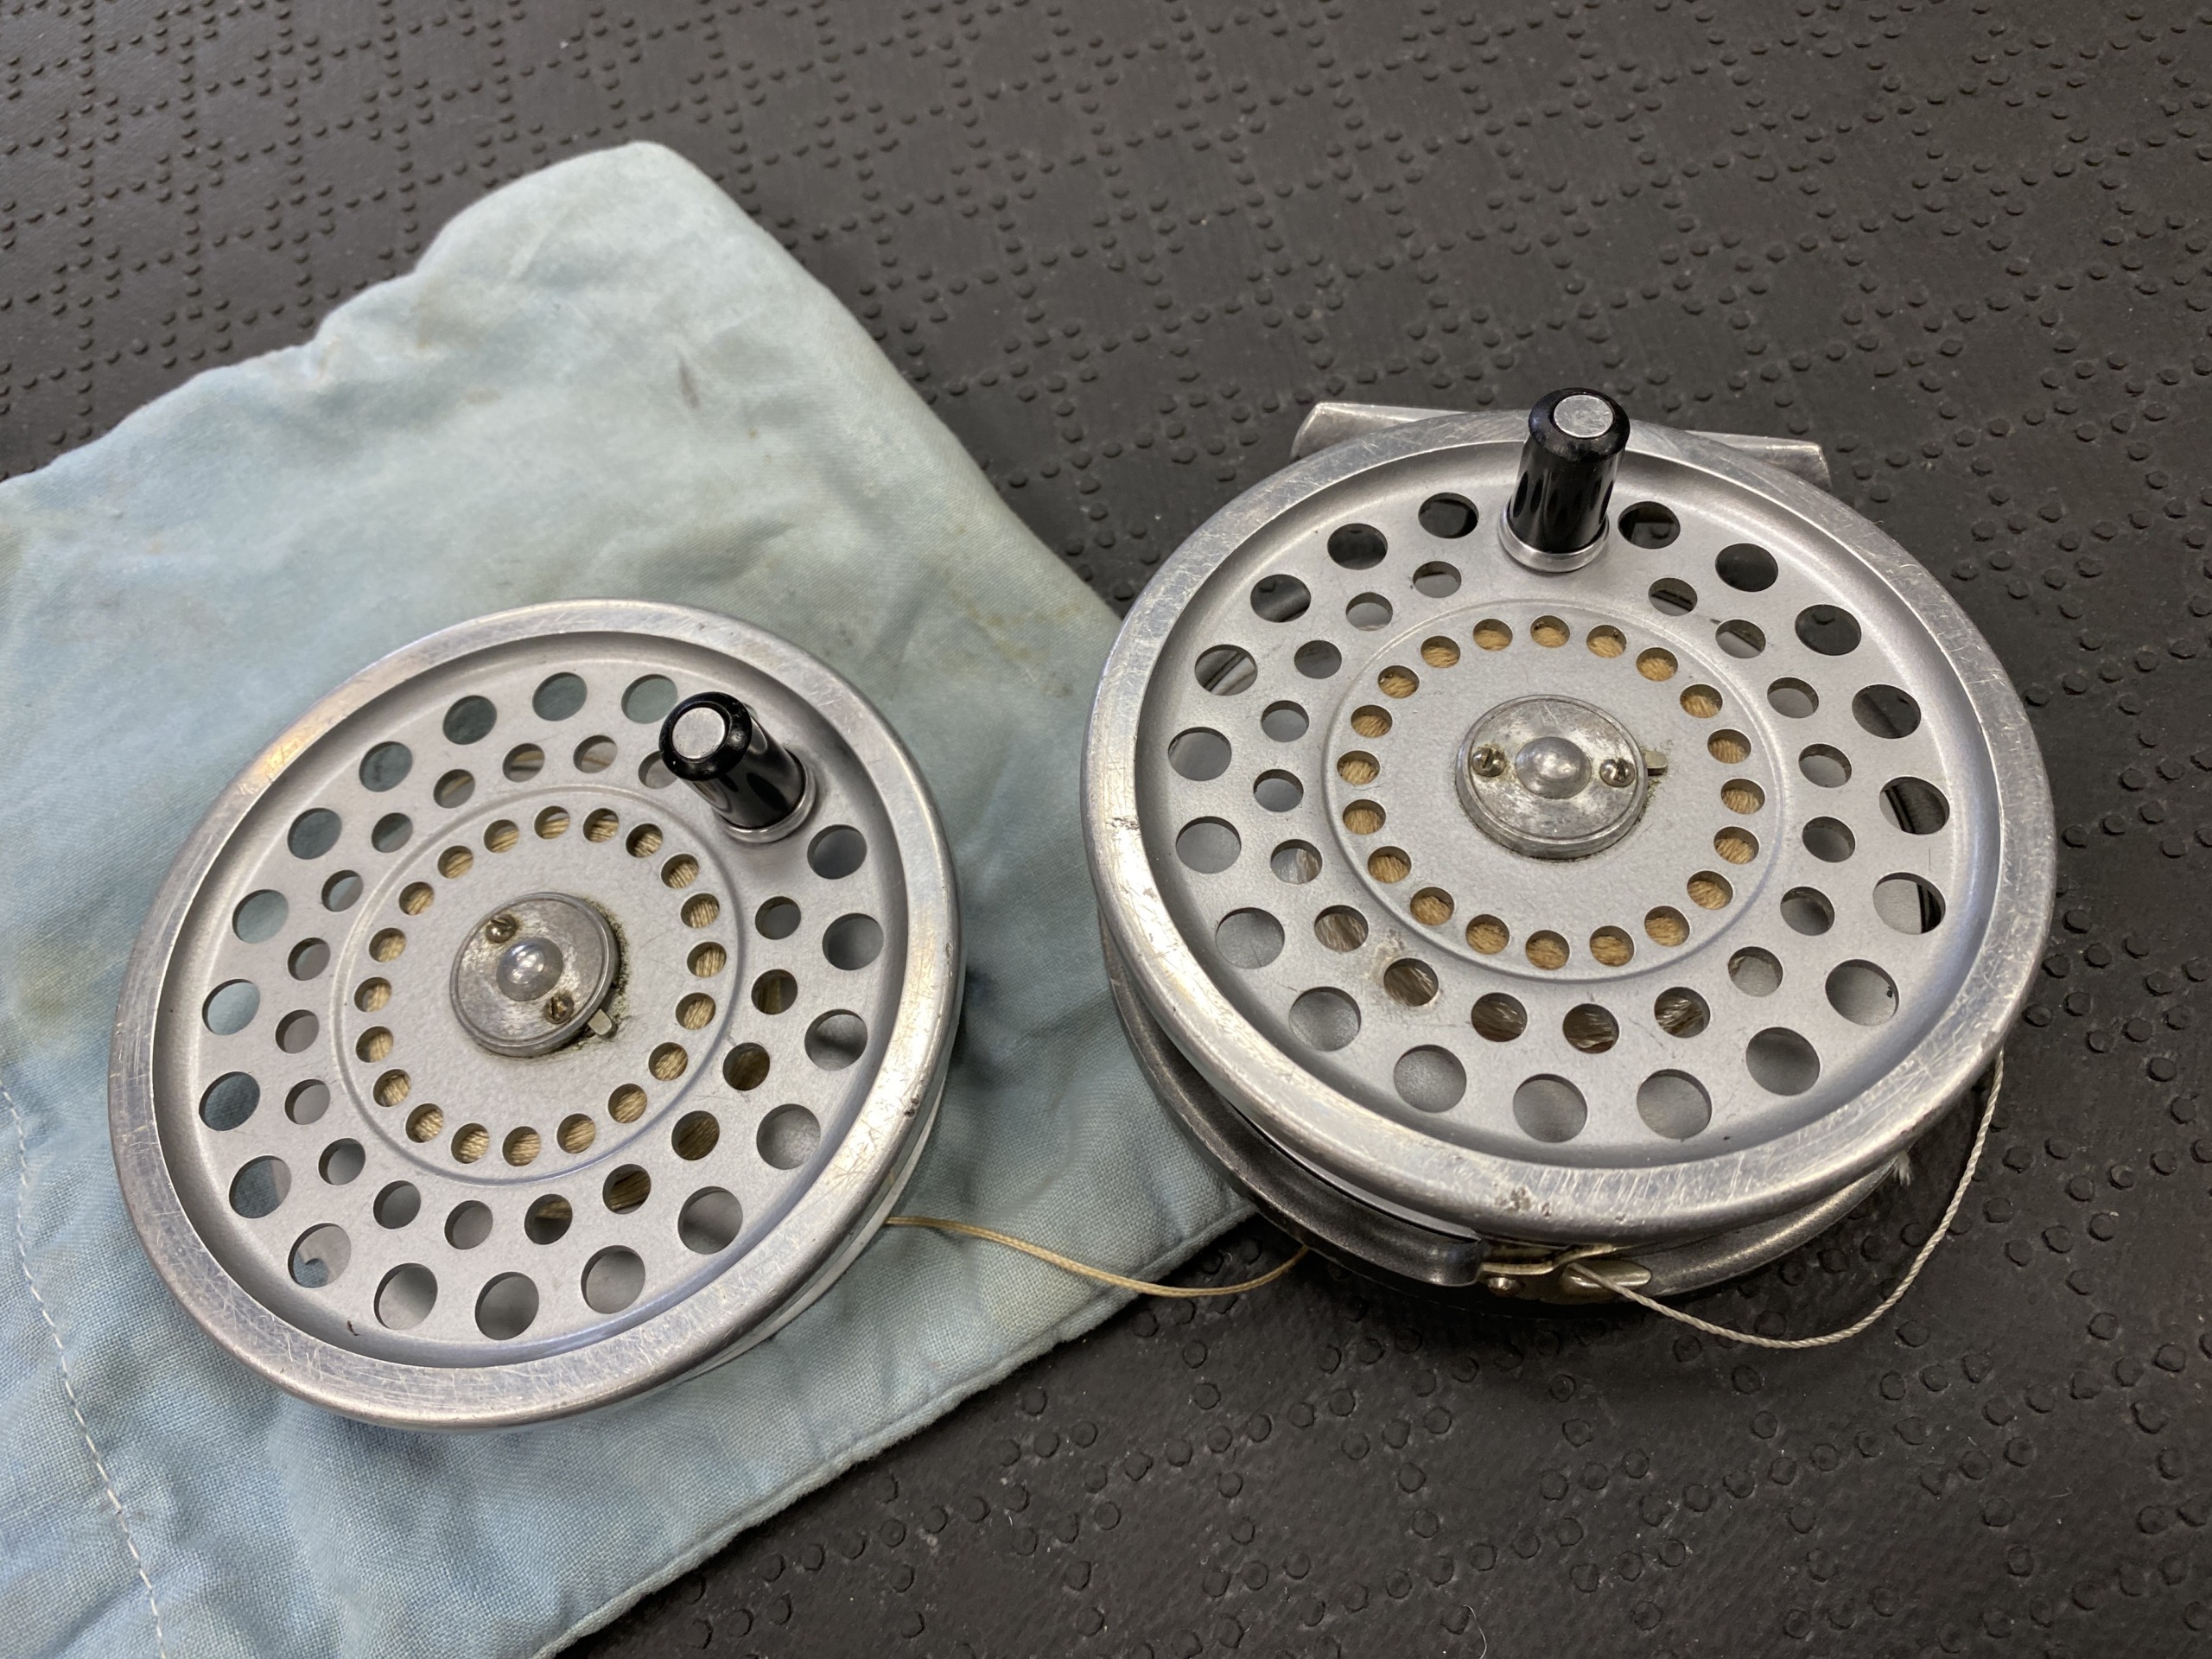 Hardy Marquis 8/9 Fly Reel - Made in England C/W Spare Spool - GOOD CONDITION! - $150